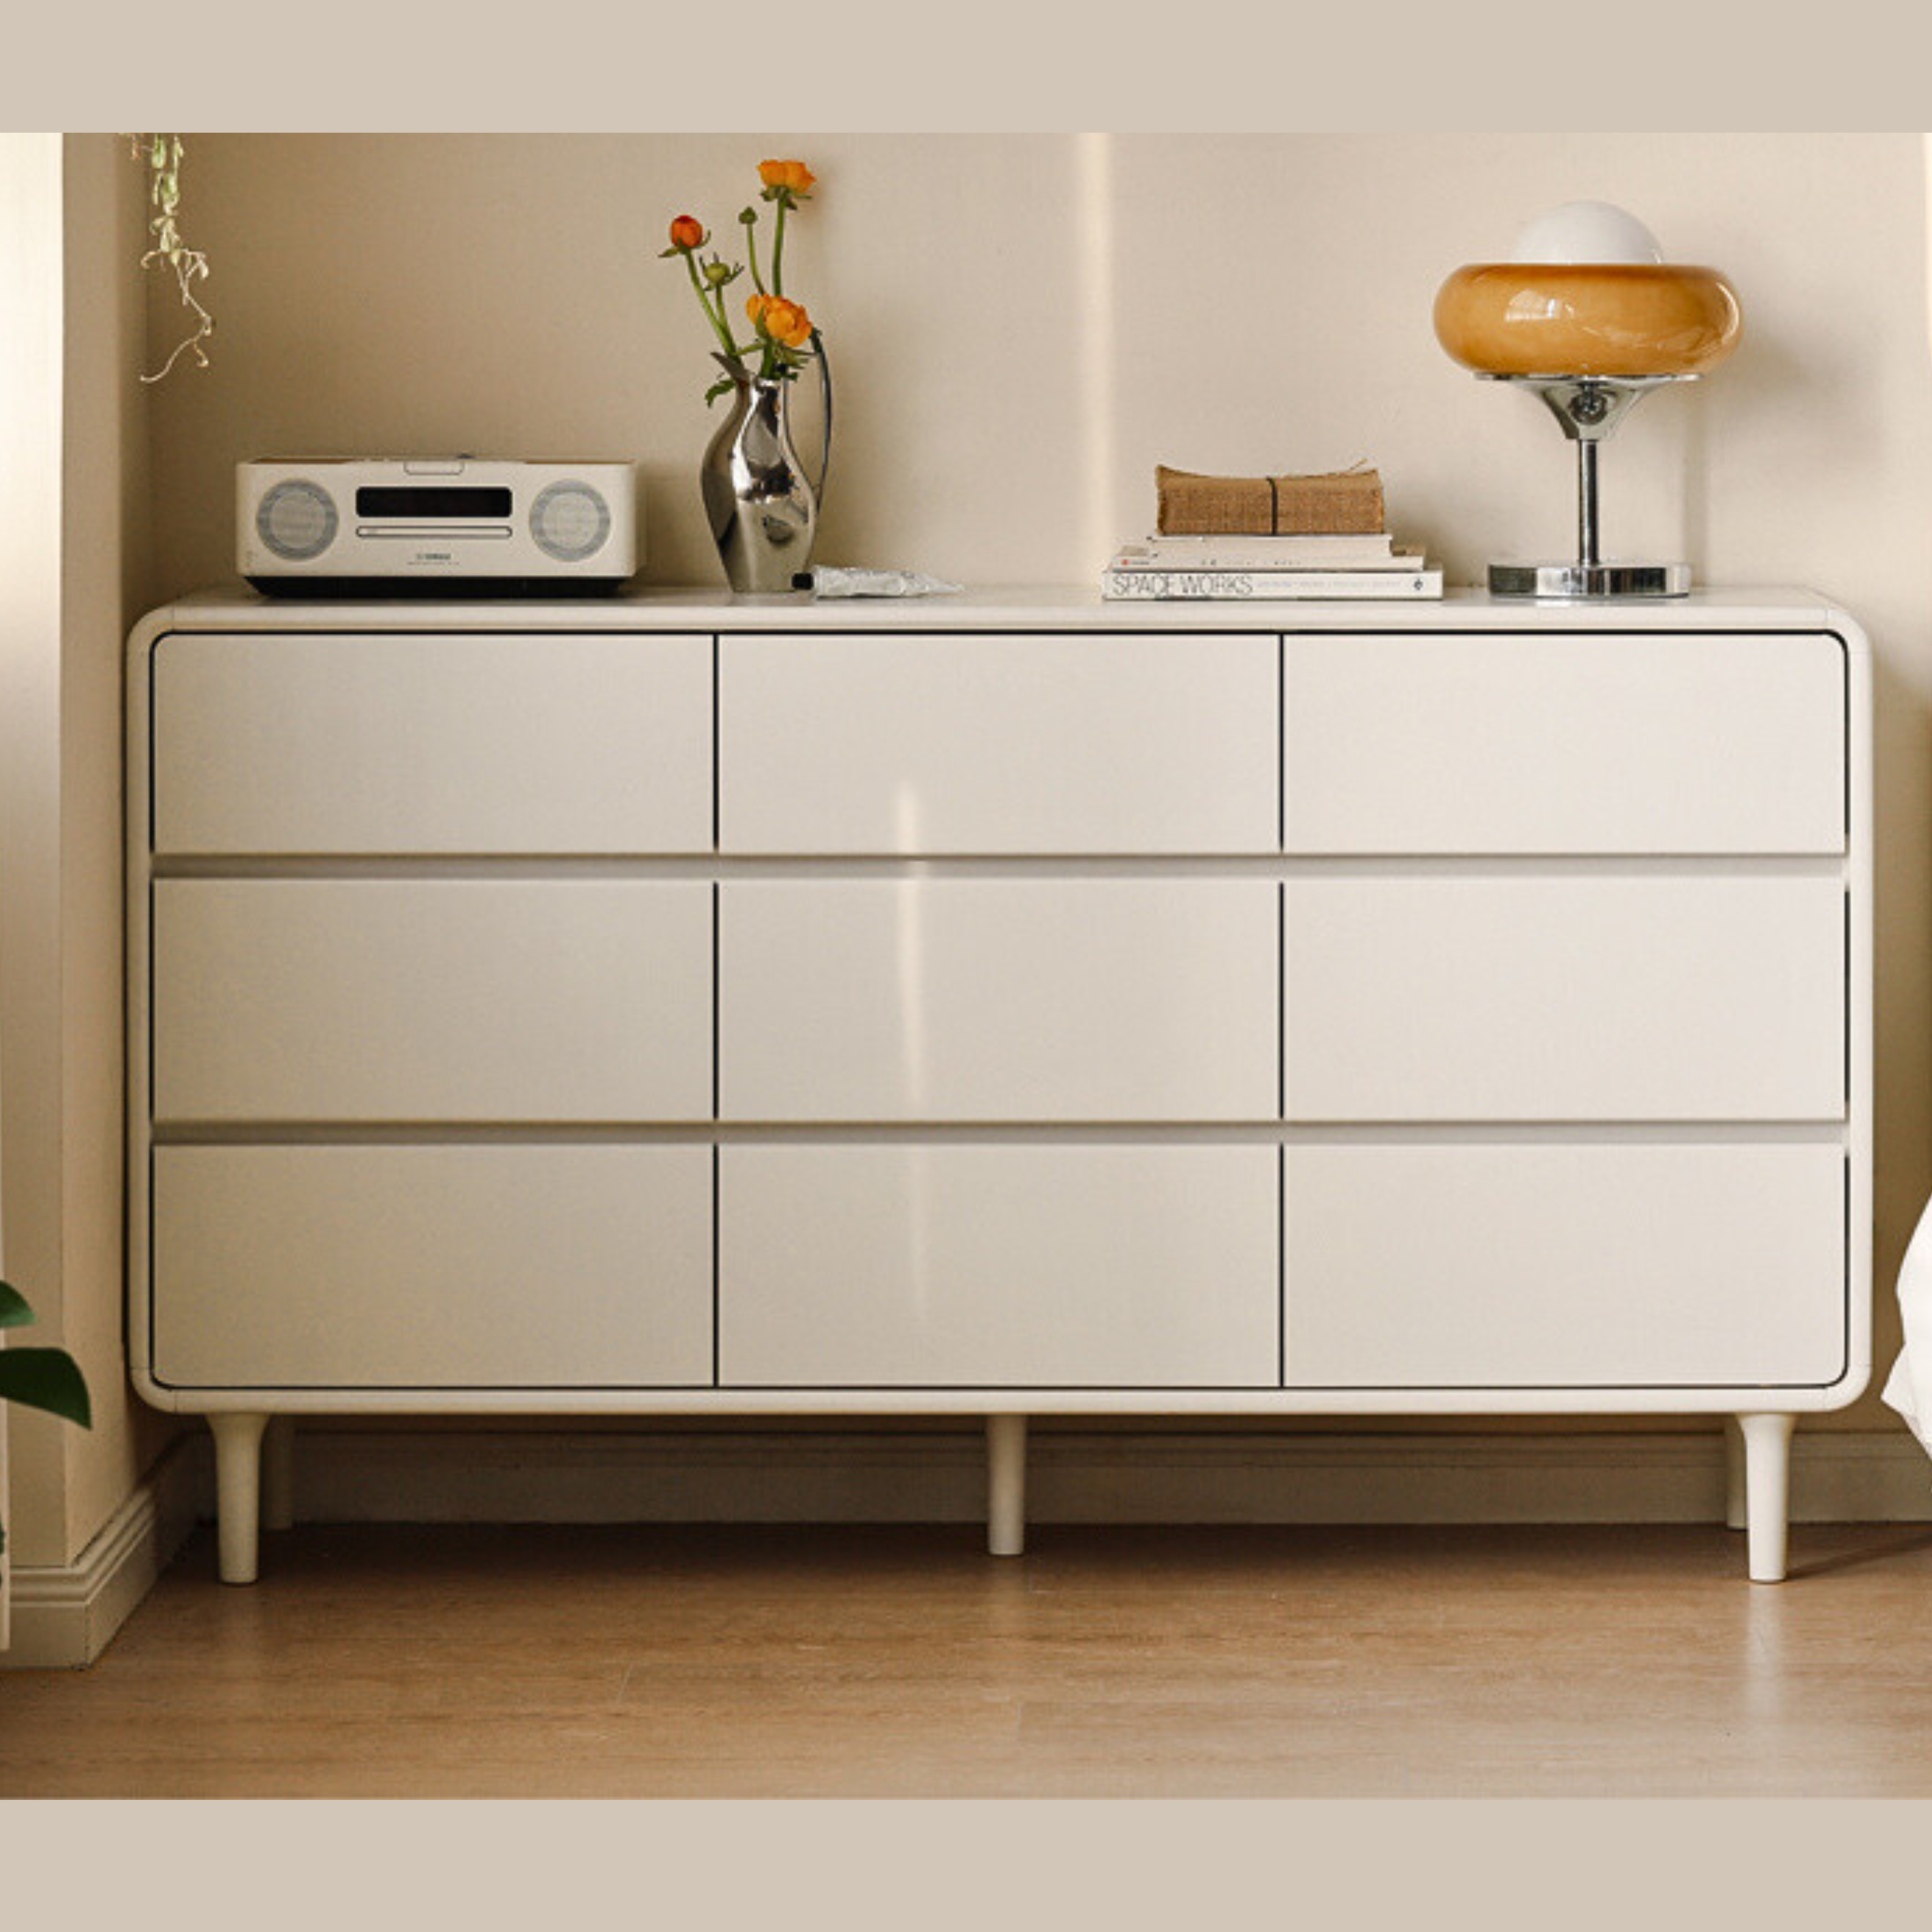 Ash solid wood Cream style chest of drawers